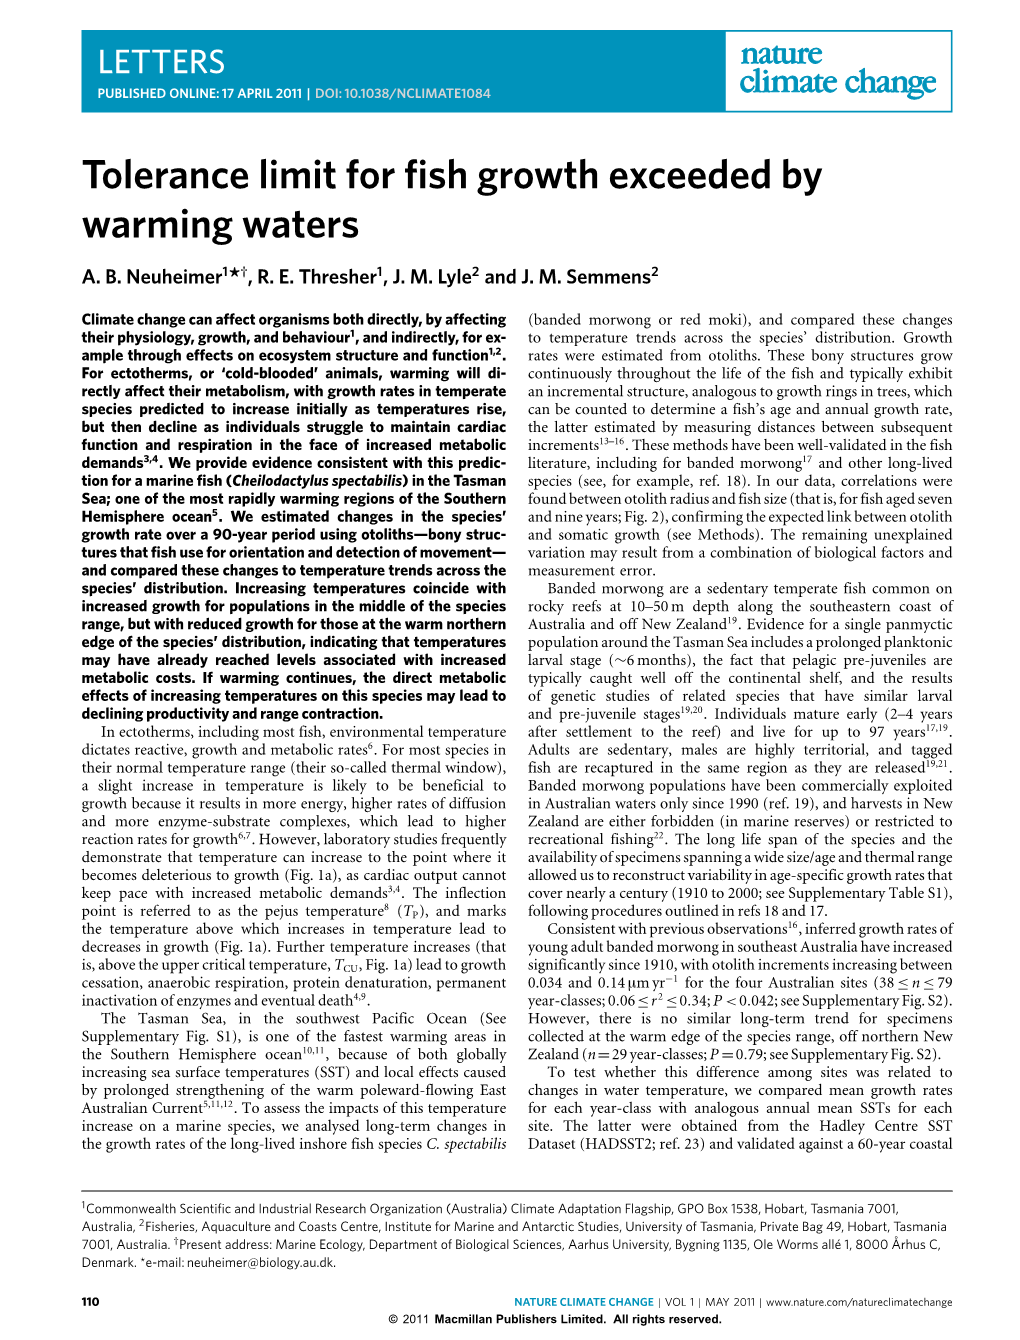 Tolerance Limit for Fish Growth Exceeded by Warming Waters